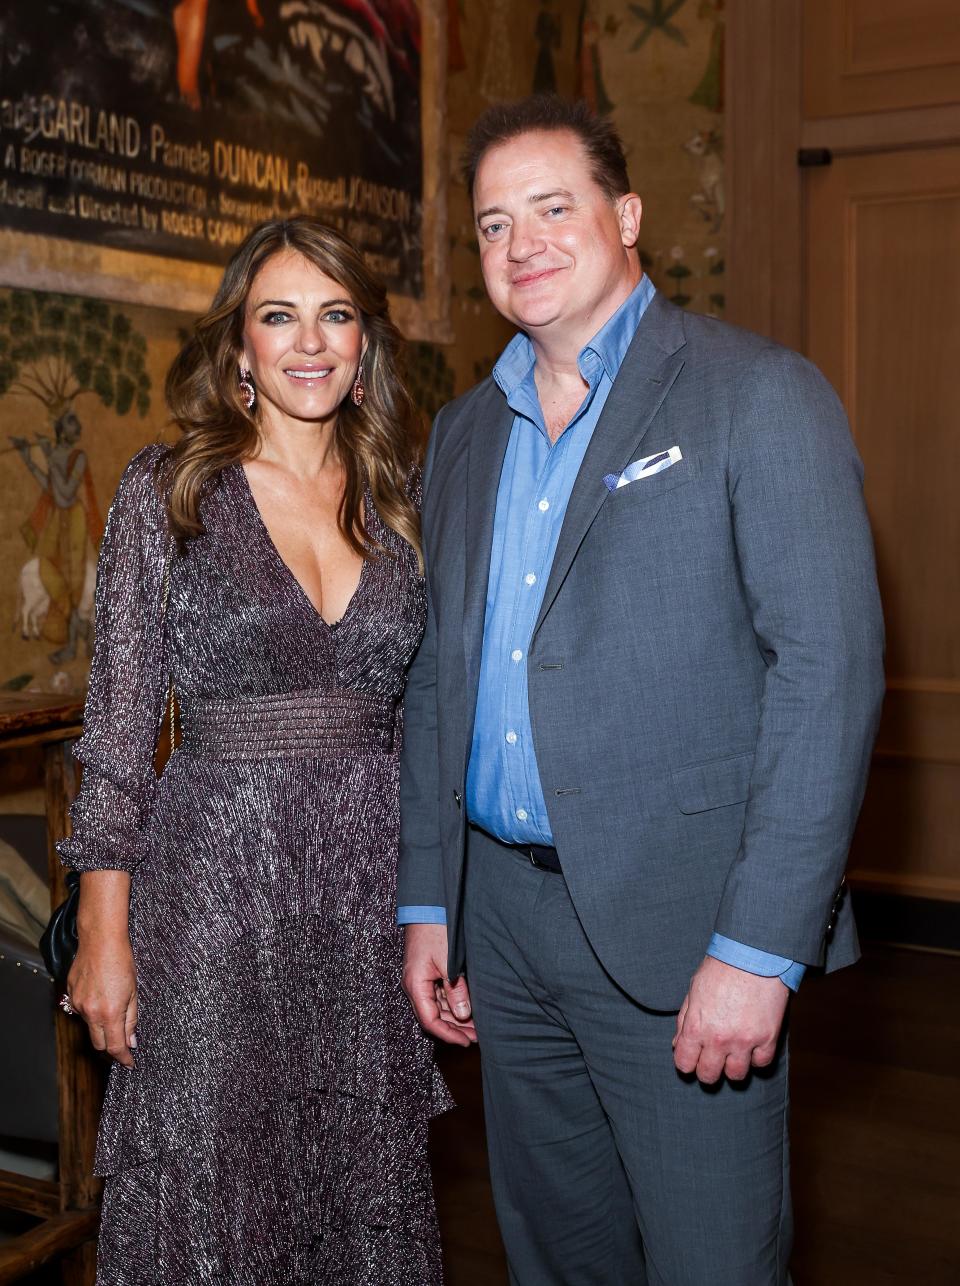 LONDON, ENGLAND - OCTOBER 10: In this image released on October 11th, Elizabeth Hurley and Brendan Fraser attend a special screening of "The Whale", at The Ham Yard Hotel in London, England. (Photo by David M. Benett/Dave Benett/Getty Images for A24)